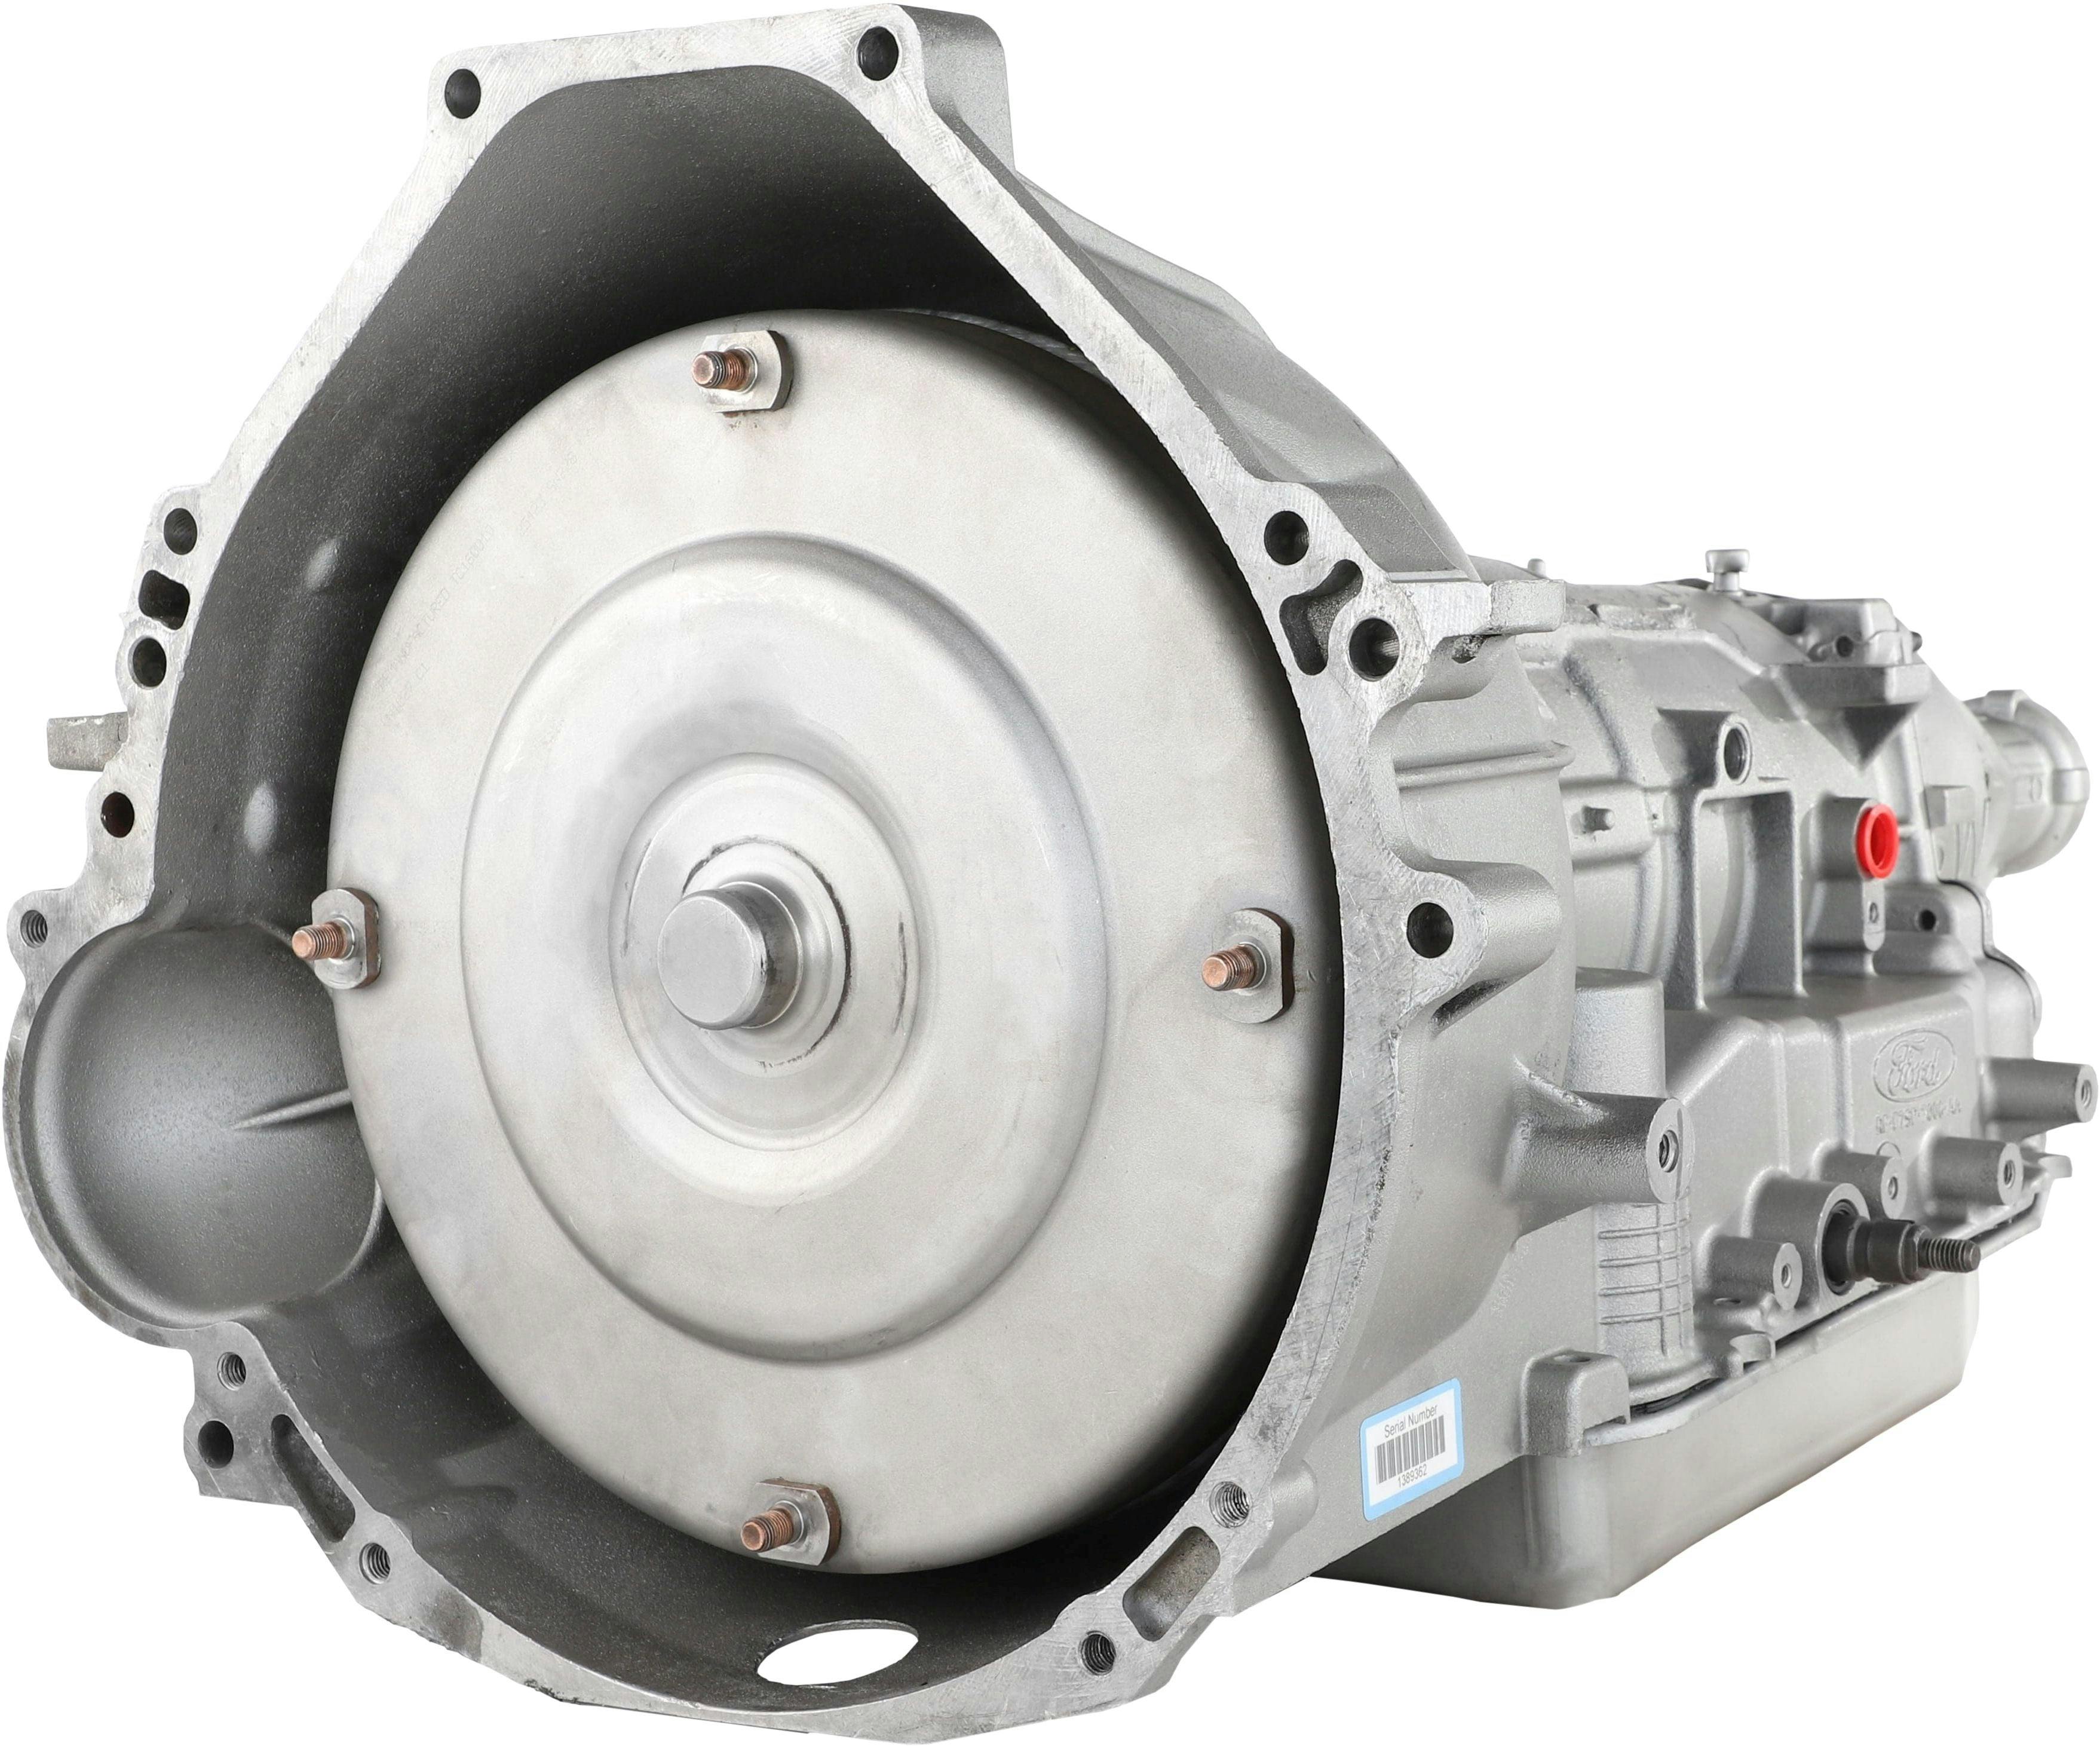 Automatic Transmission for 1998 Ford F-150 RWD with 4.2L V6 Engine